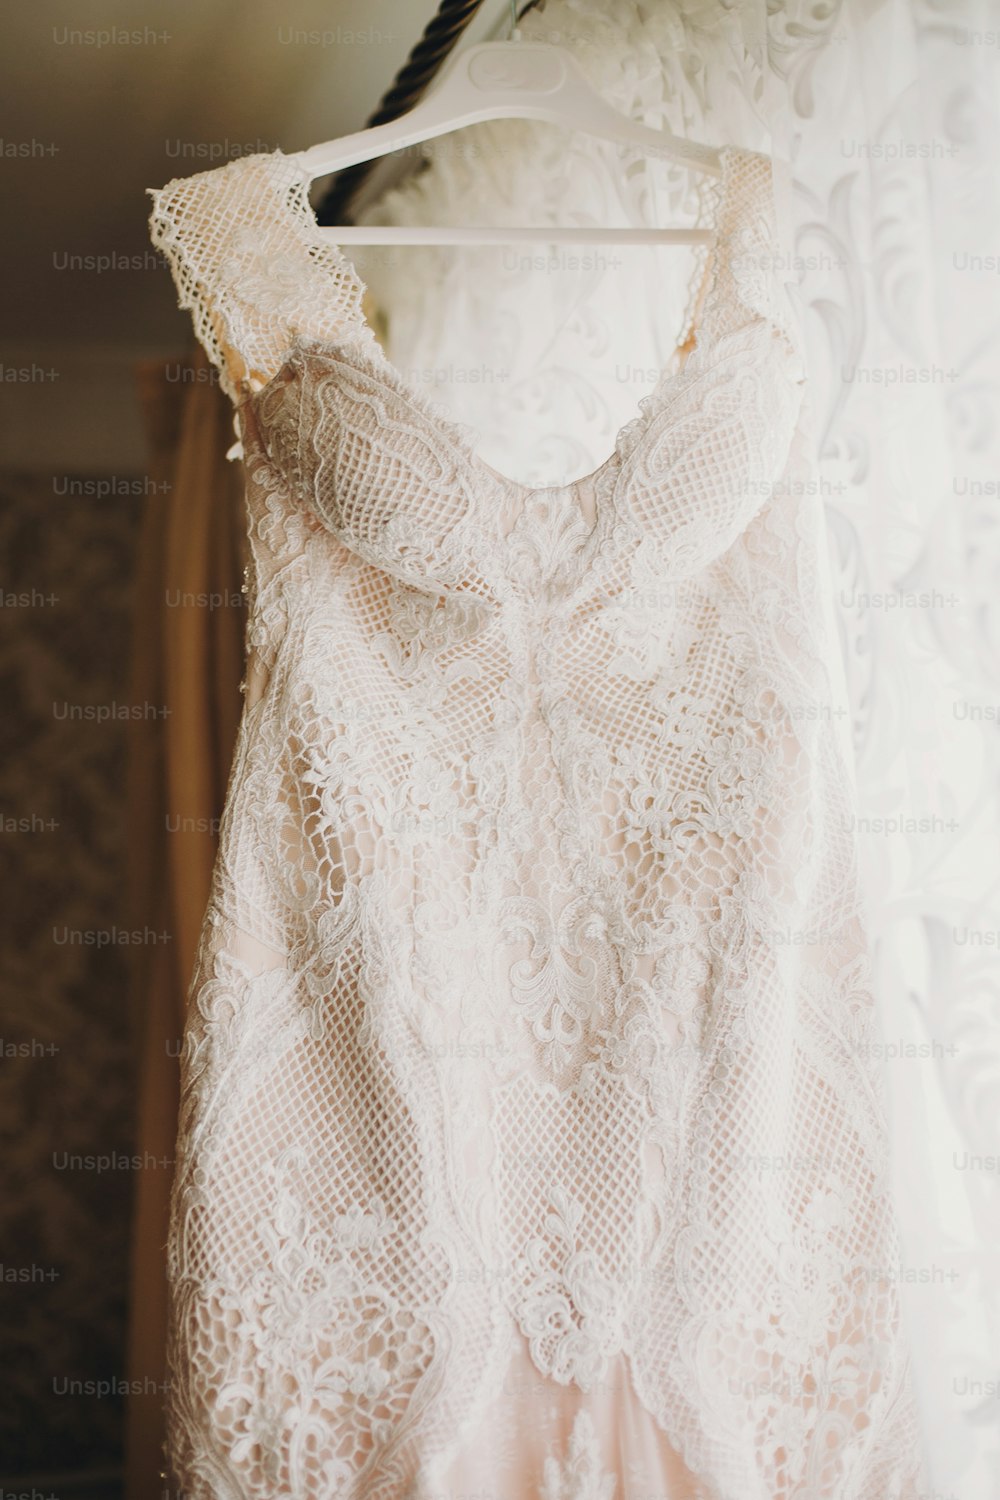 Luxury modern wedding dress hanging at window. Amazing stylish wedding gown with lace floral details, pastel pink color. Wedding salon